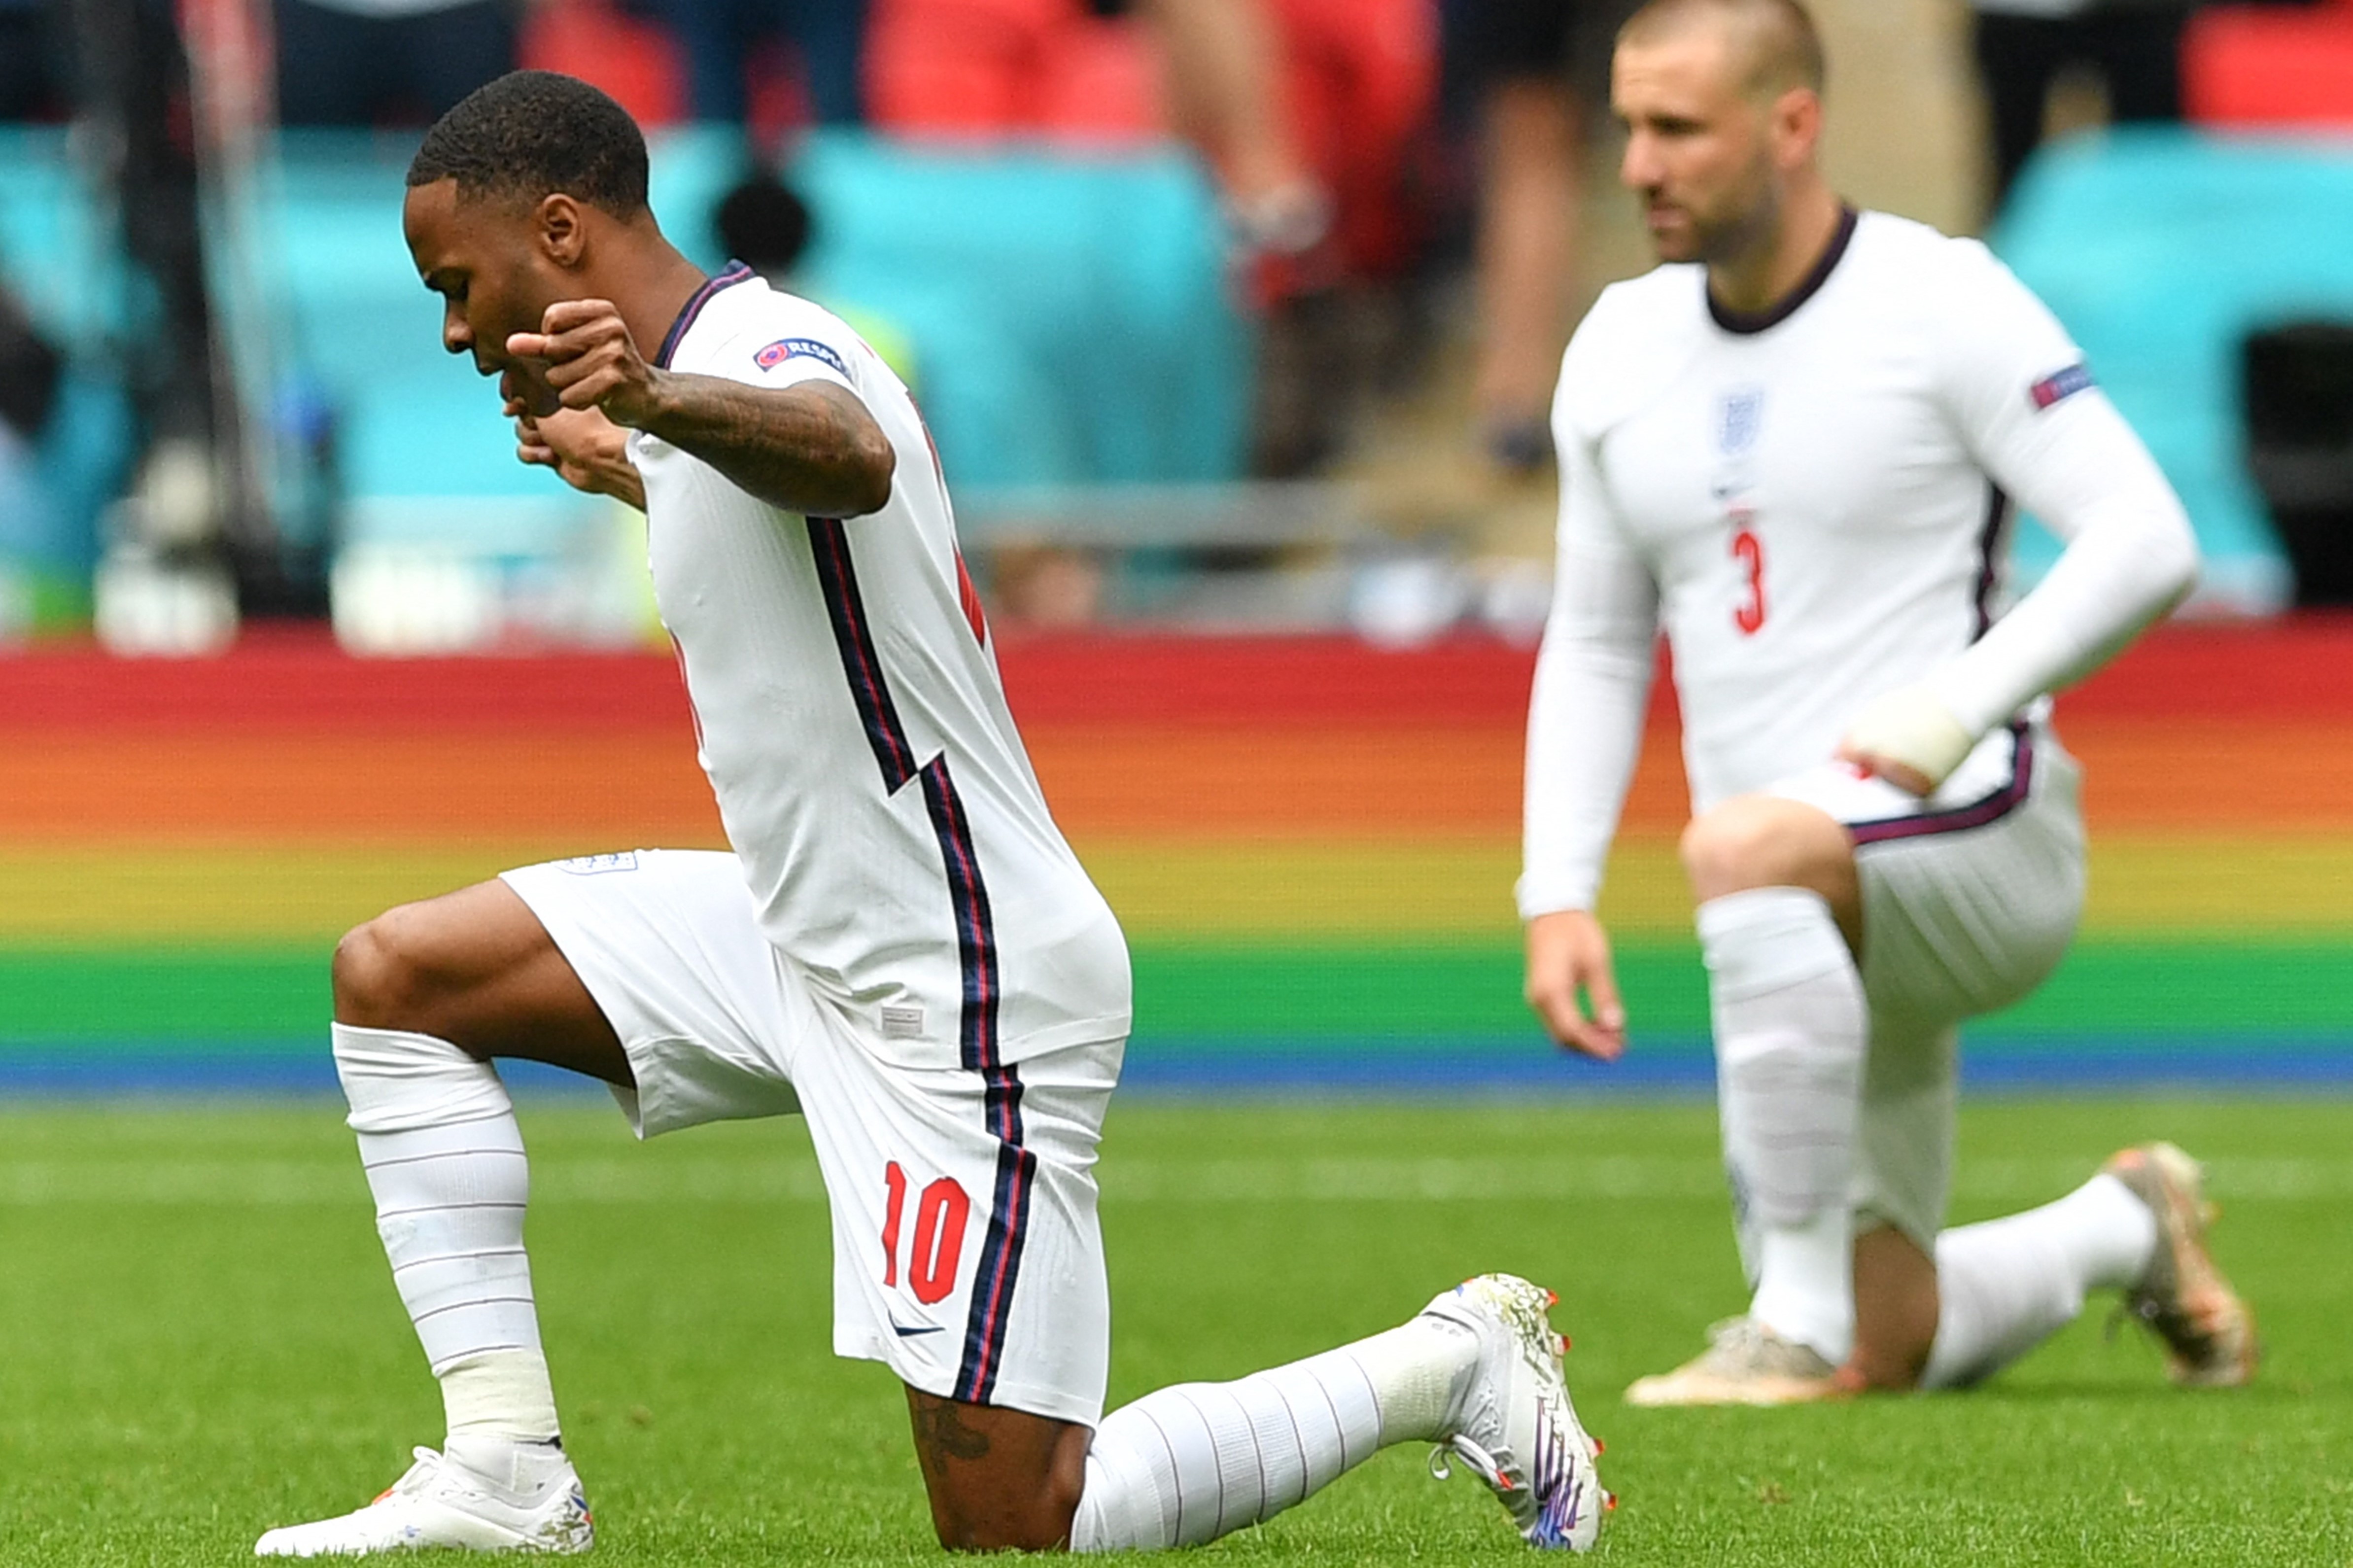 England's forward Raheem Sterling (L) takes a knee ahead of the UEFA EURO 2020 round of 16 football match between England and Germany at Wembley Stadium in London on June 29, 2021.